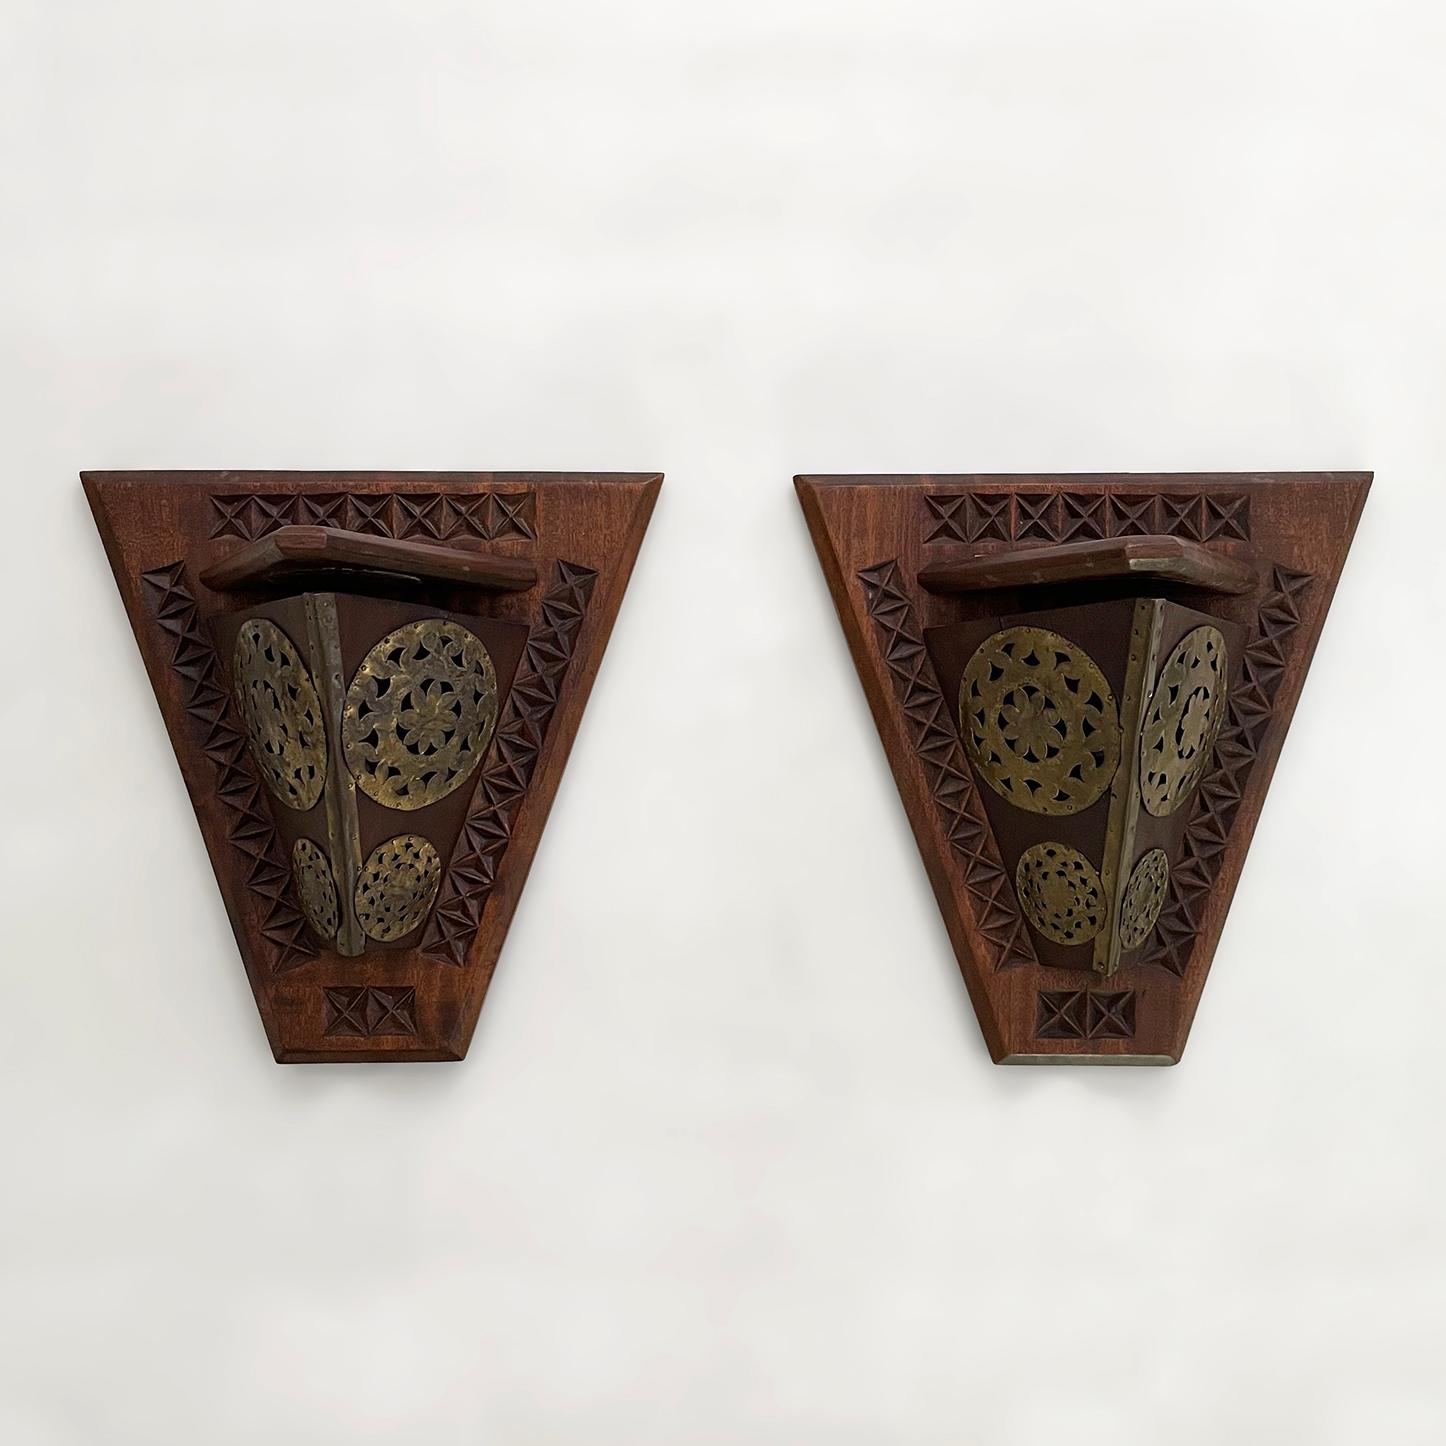 Pair of French Art Deco wood sconces with brass detail
France, circa 1940’s
Large scale wood wall sconces with brass details
Each sconce is handmade and unique in it’s composition
Brass details have various levels of patina from age and use
One